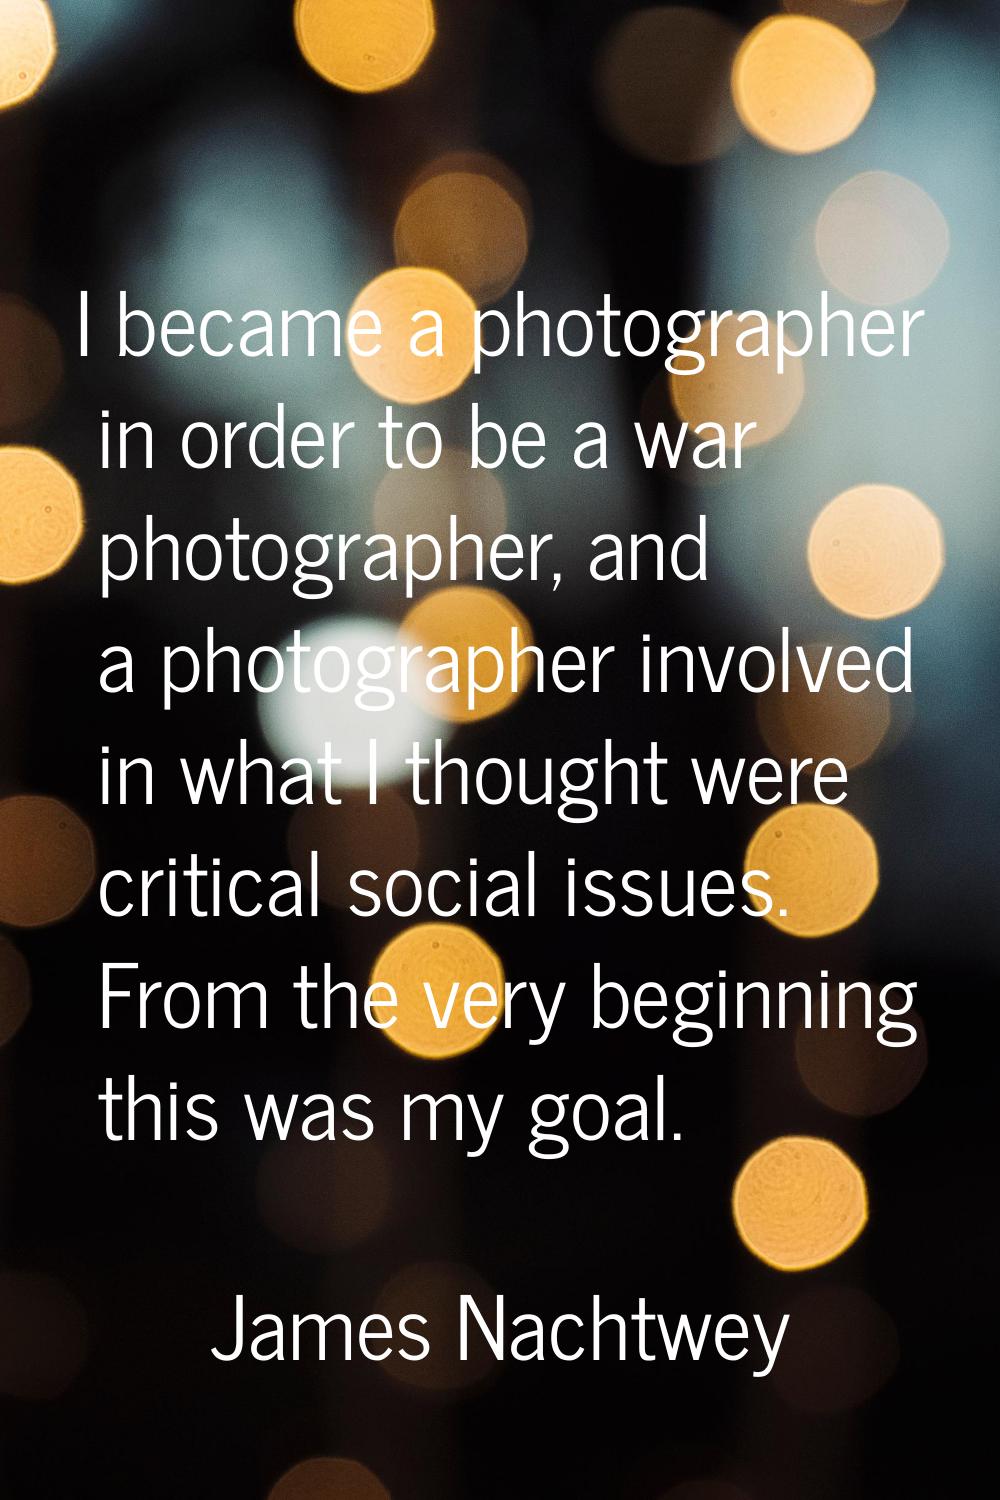 I became a photographer in order to be a war photographer, and a photographer involved in what I th